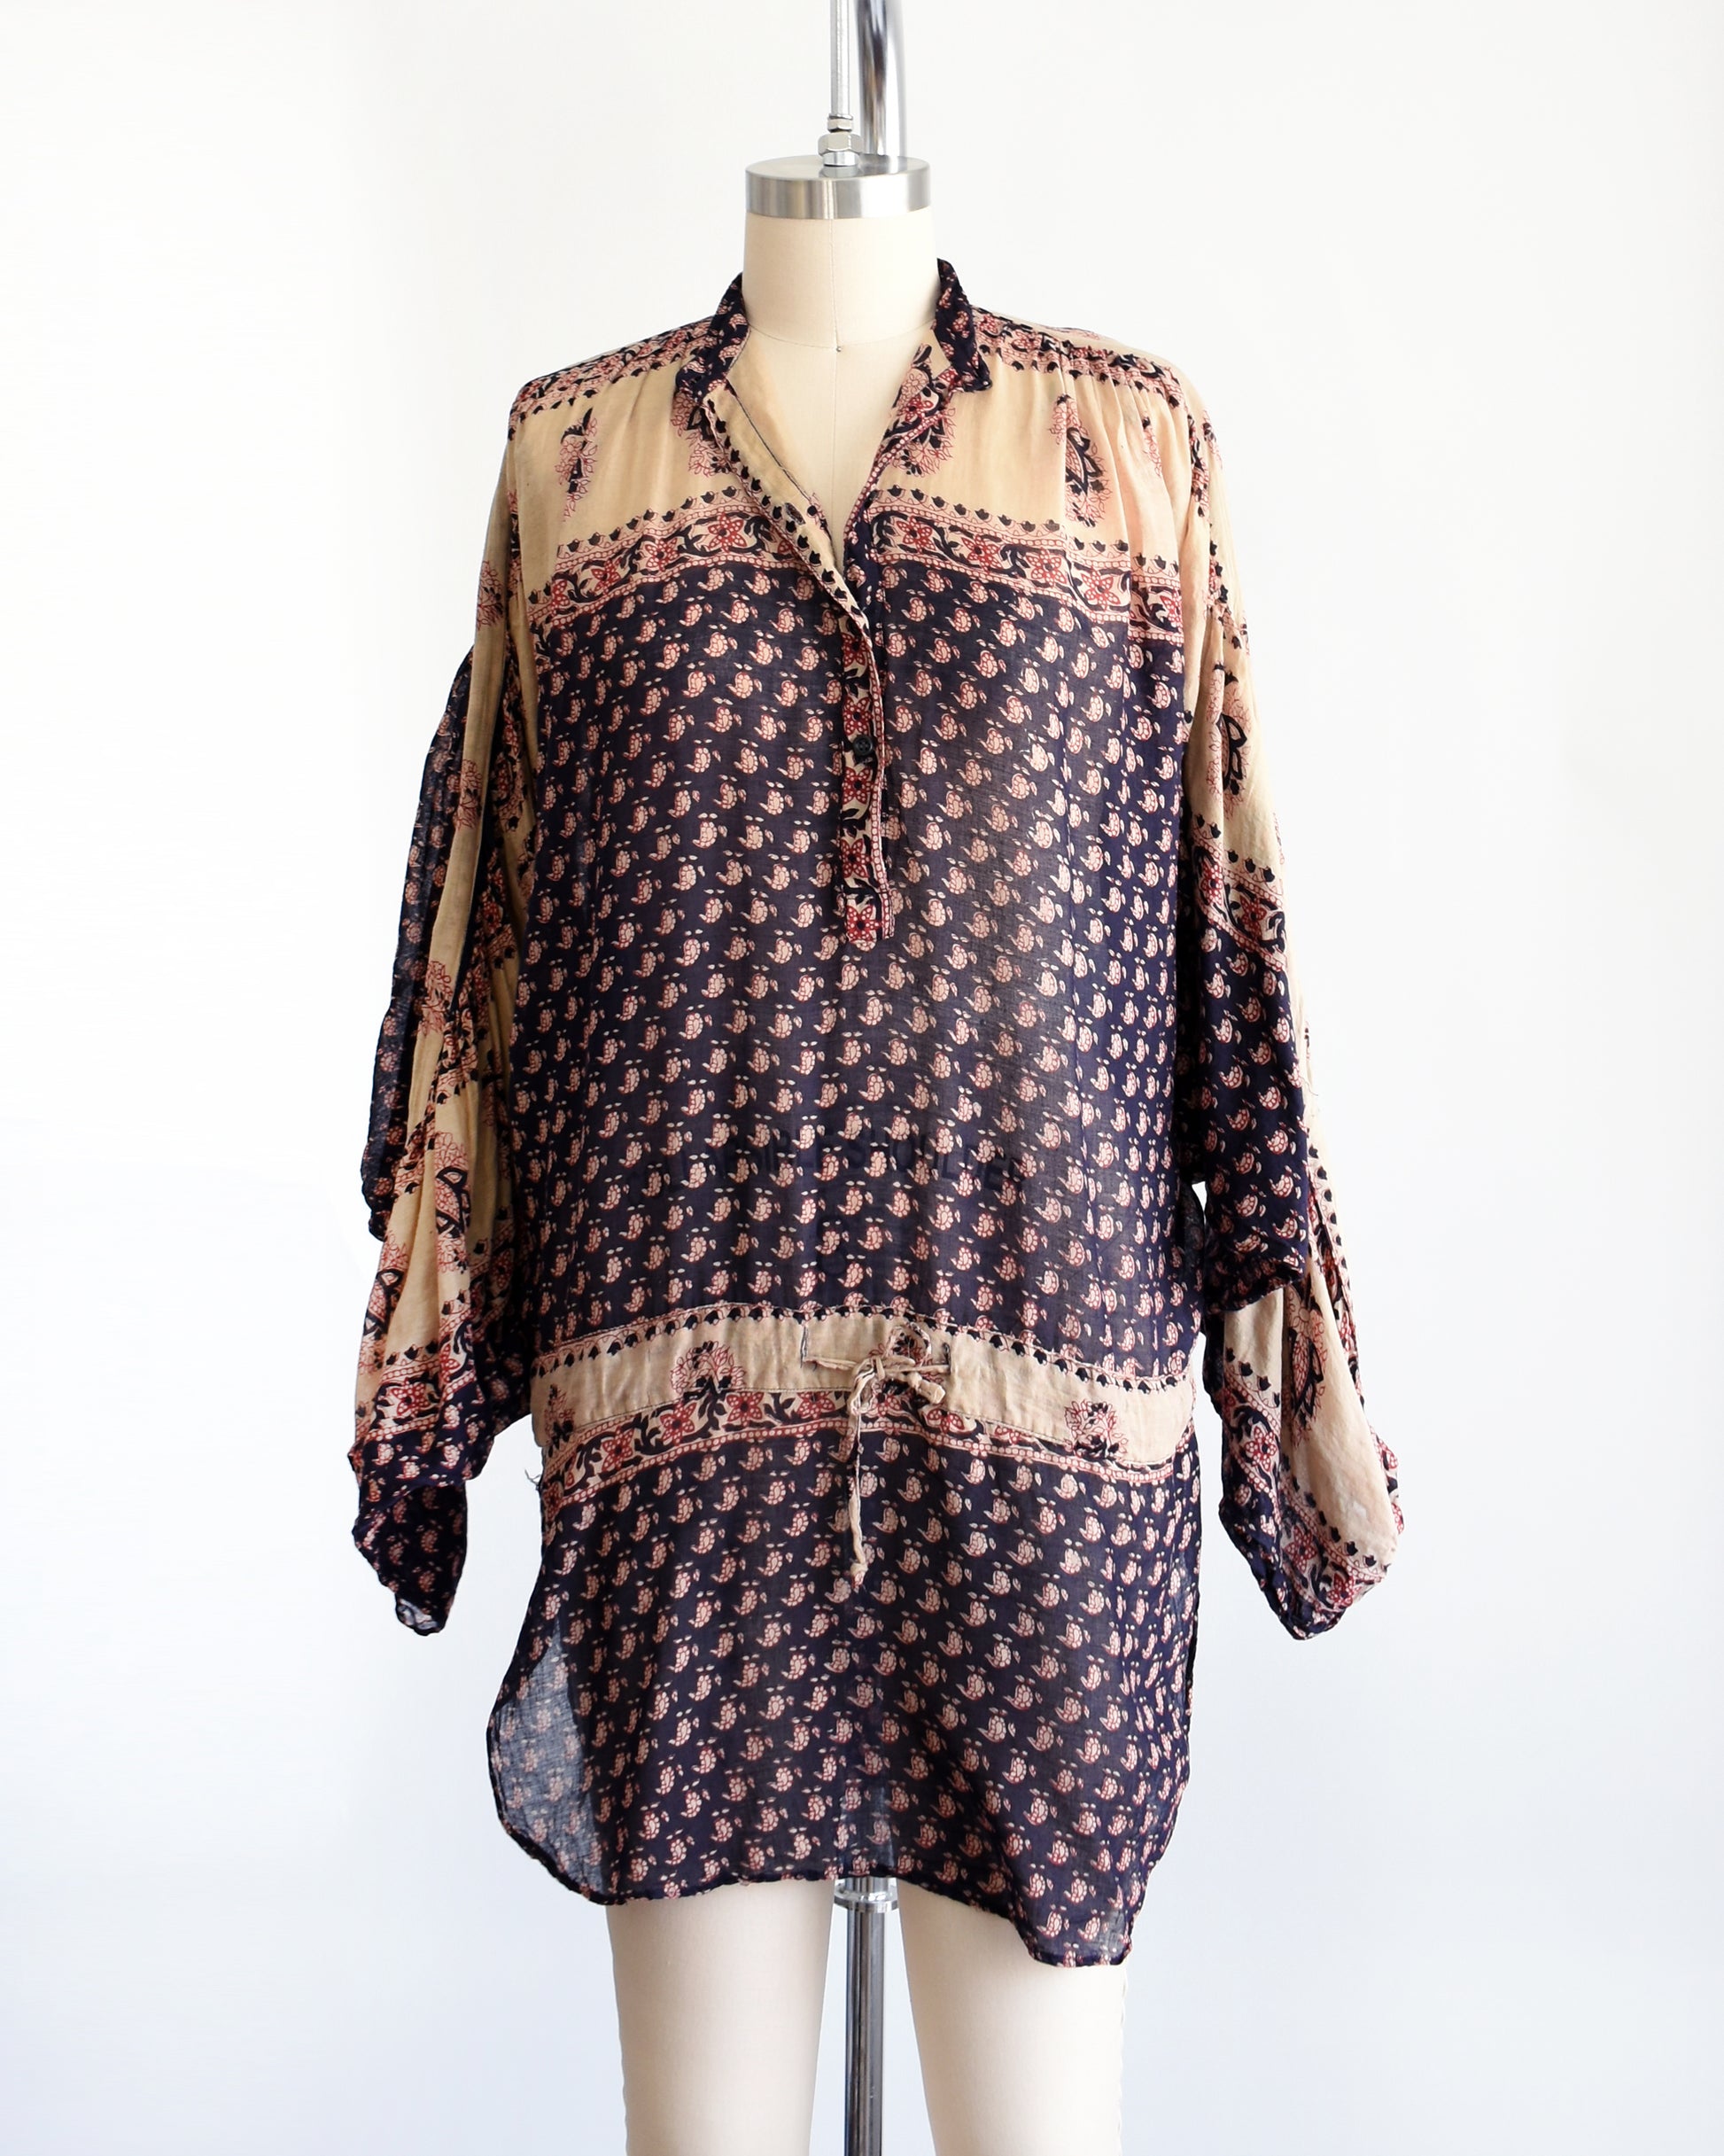 A vintage 1970s Indian cotton tunic made from thin, gauzy navy blue and light tan cotton with a red and navy floral block print. The tunic shown unbuttoned in this photo.